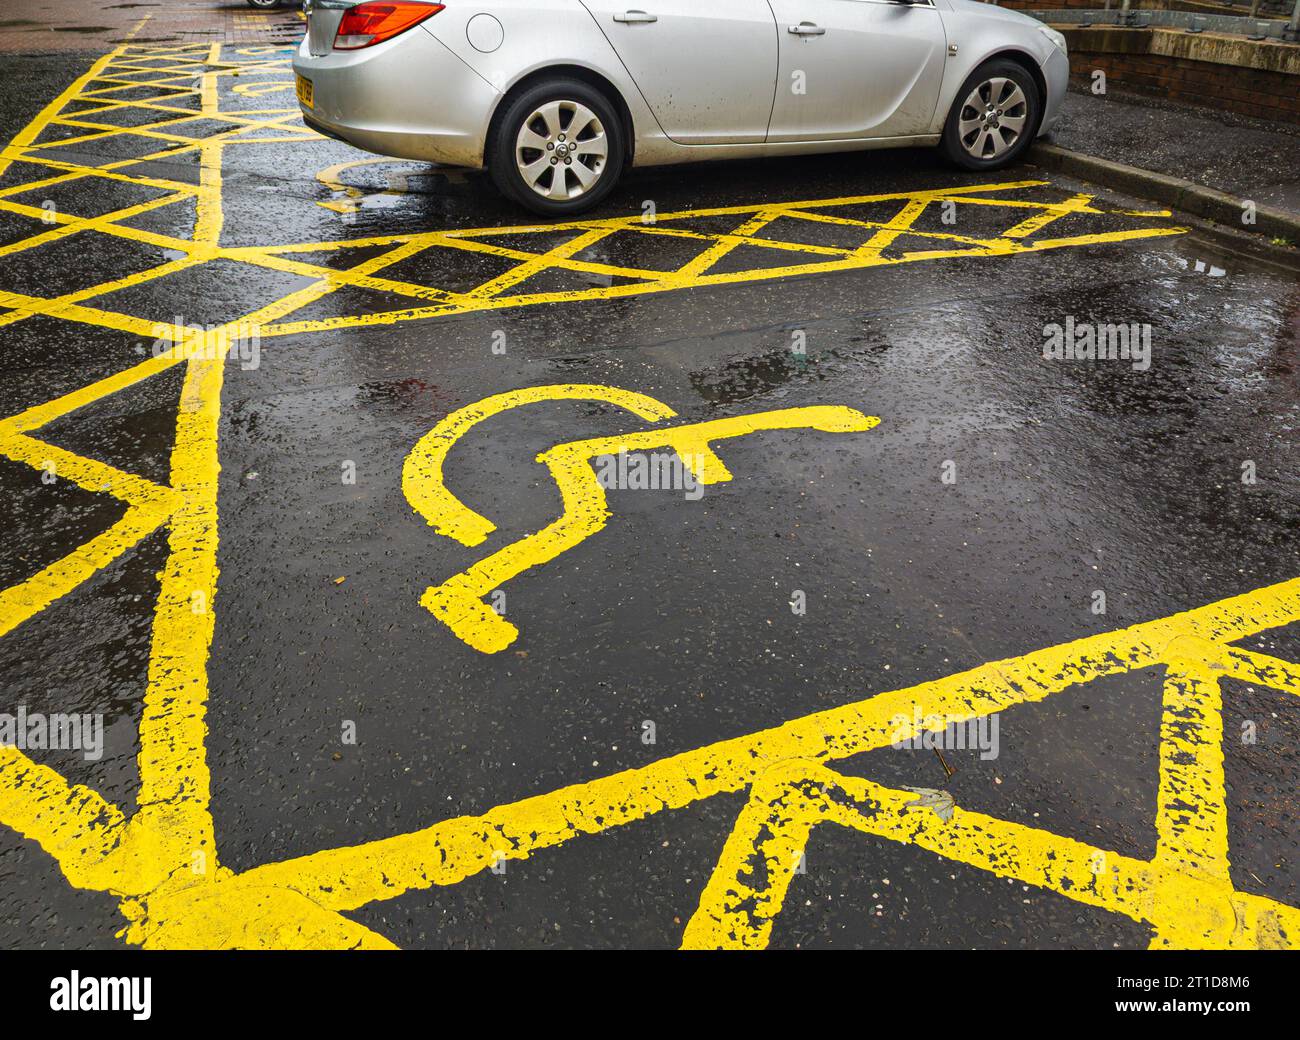 yellow road markings on the road to identify multiple diabled parking spaces in the UK.  Disabled parking sign. Parking for disabled, handicapped citi Stock Photo